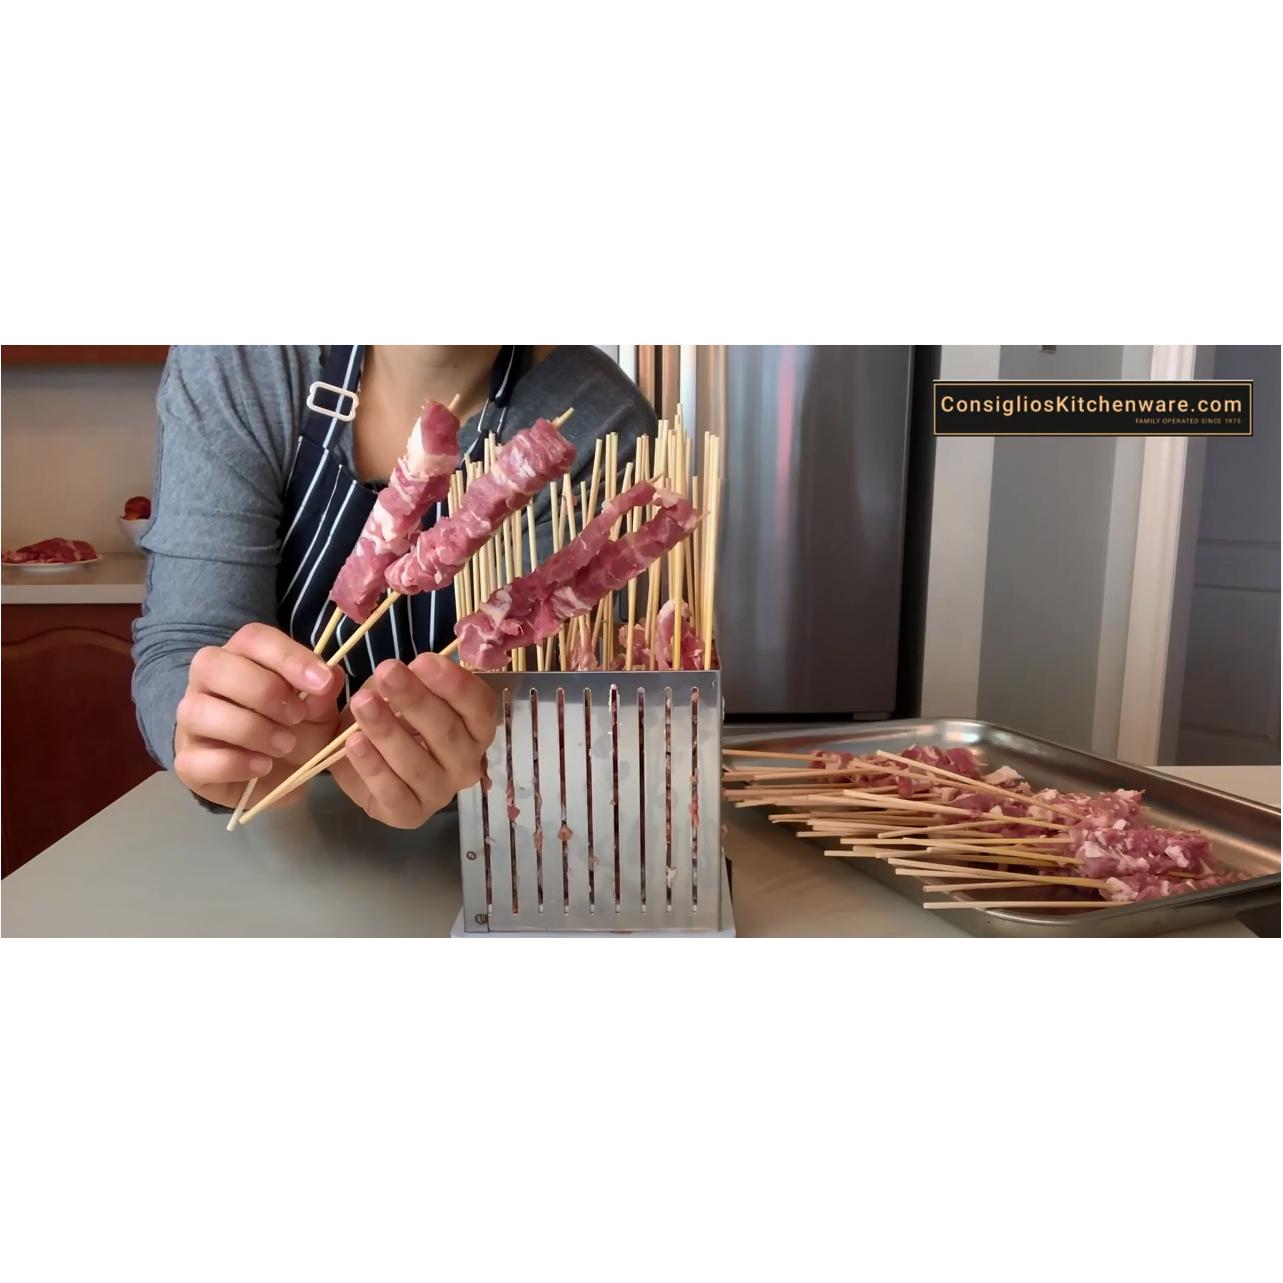 Cubo Complete Arrosticini Maker Kit with Knife & Skewers - Makes 100 Authentic Italian Lamb Skewers  Cubo